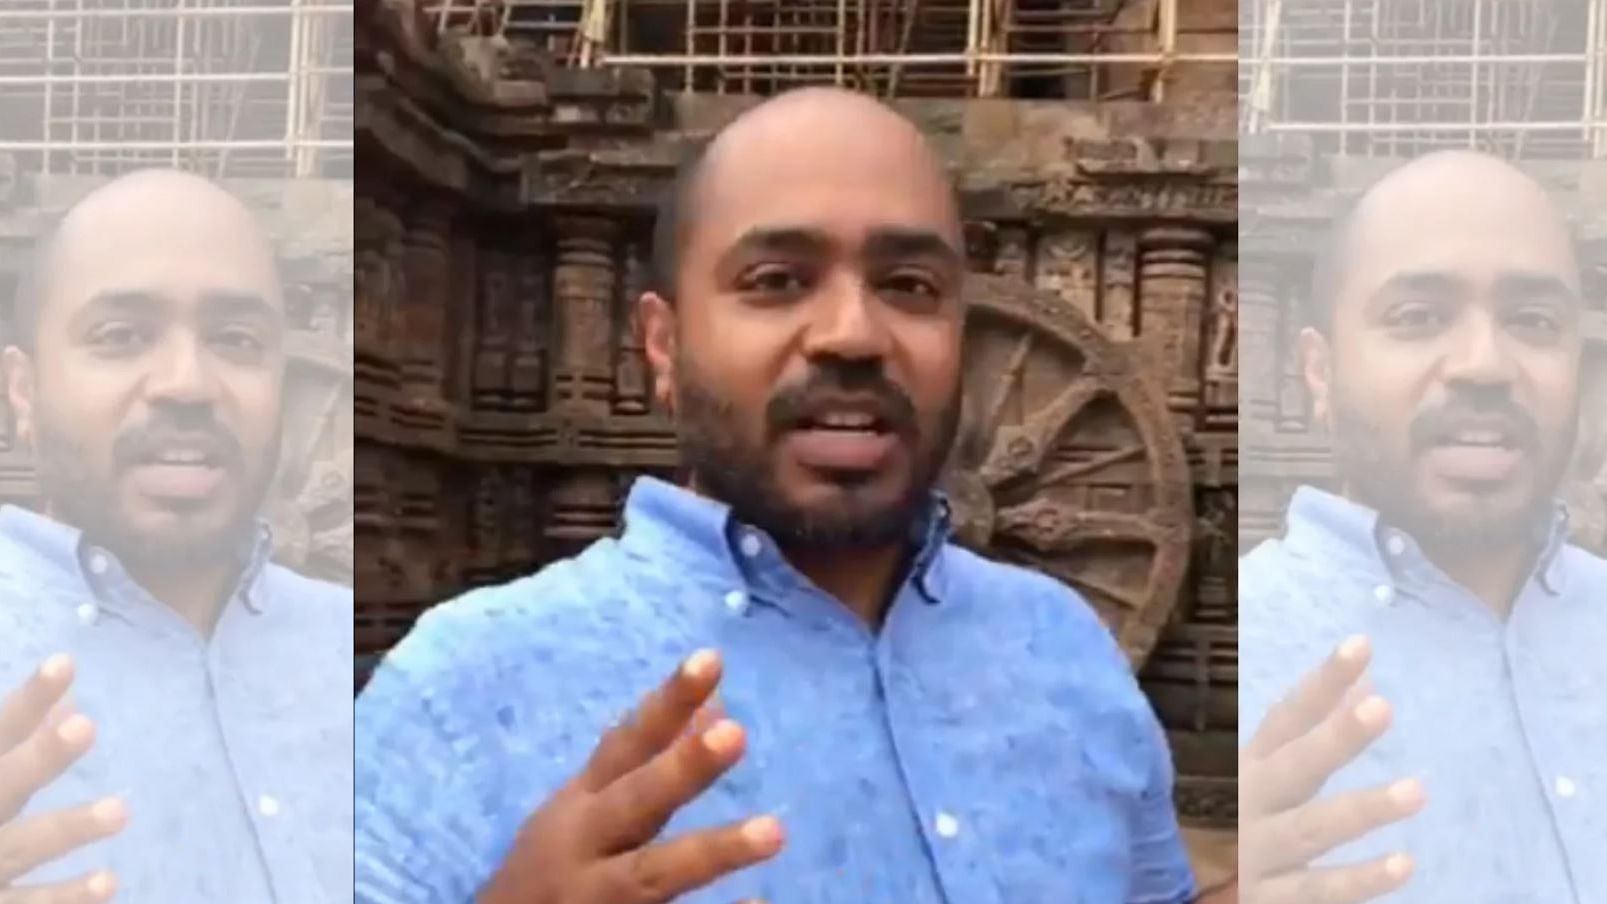 In a video uploaded on social media on Saturday, 15 September, Mitra was seen criticising the 13th century temple.